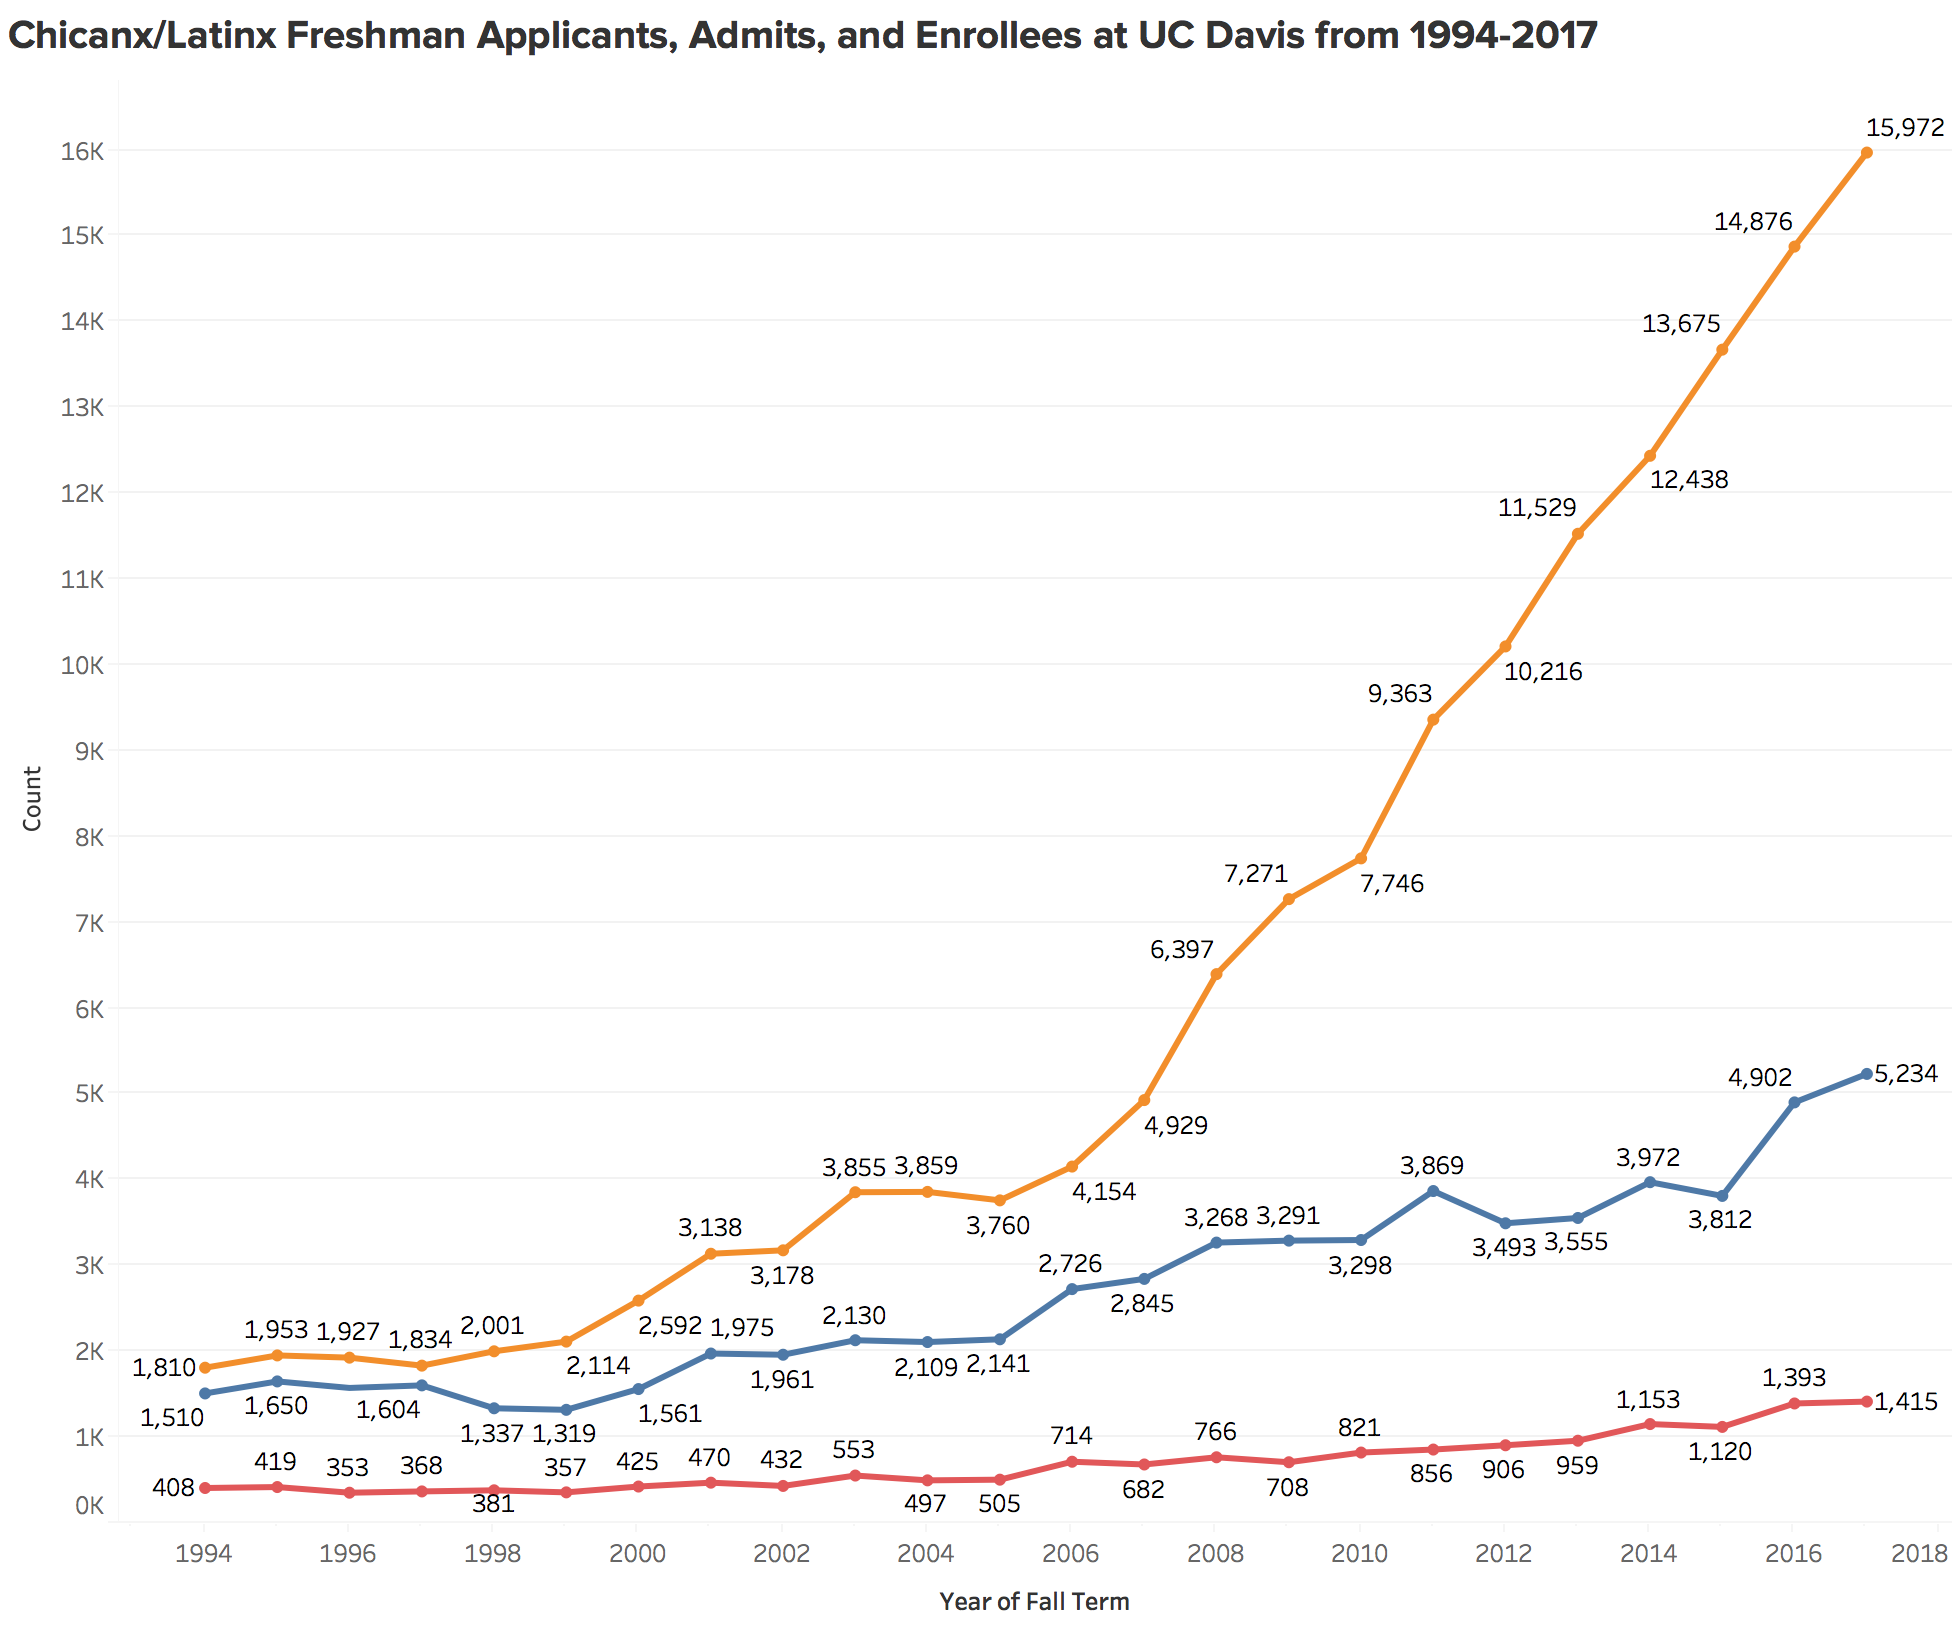 Figure 7. the number of applications from chicanx/latinx students have increased dramatically in the past ten years. Even as applications have increased, the number of admits and enrollees has increased at a much slower pace. source: Uc Davis student information systems